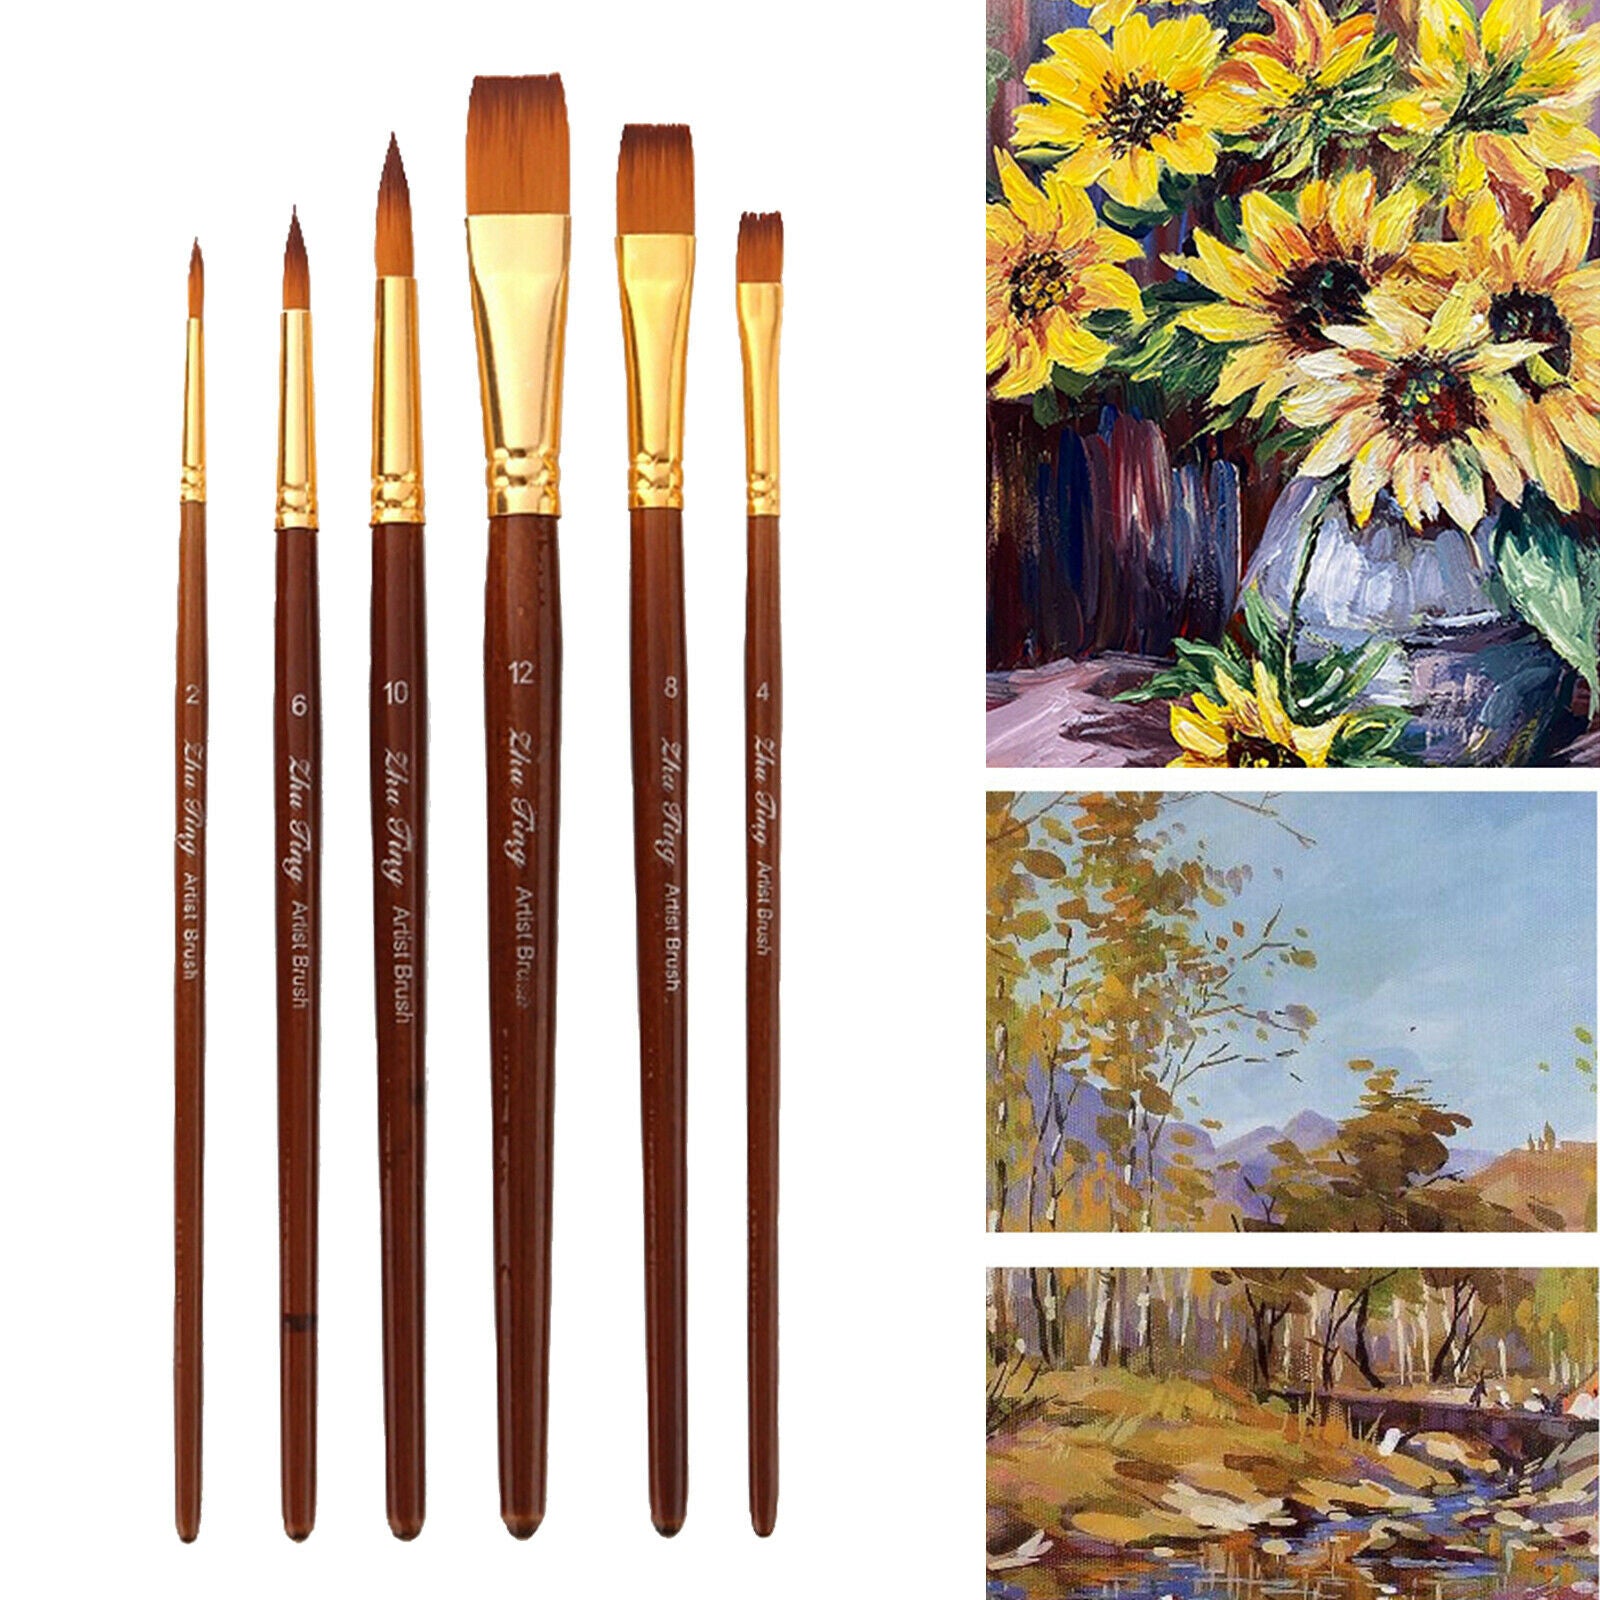 6x Artist Paint Brushes Set DIY Acrylic Oil Watercolor Painting Brushes Tool